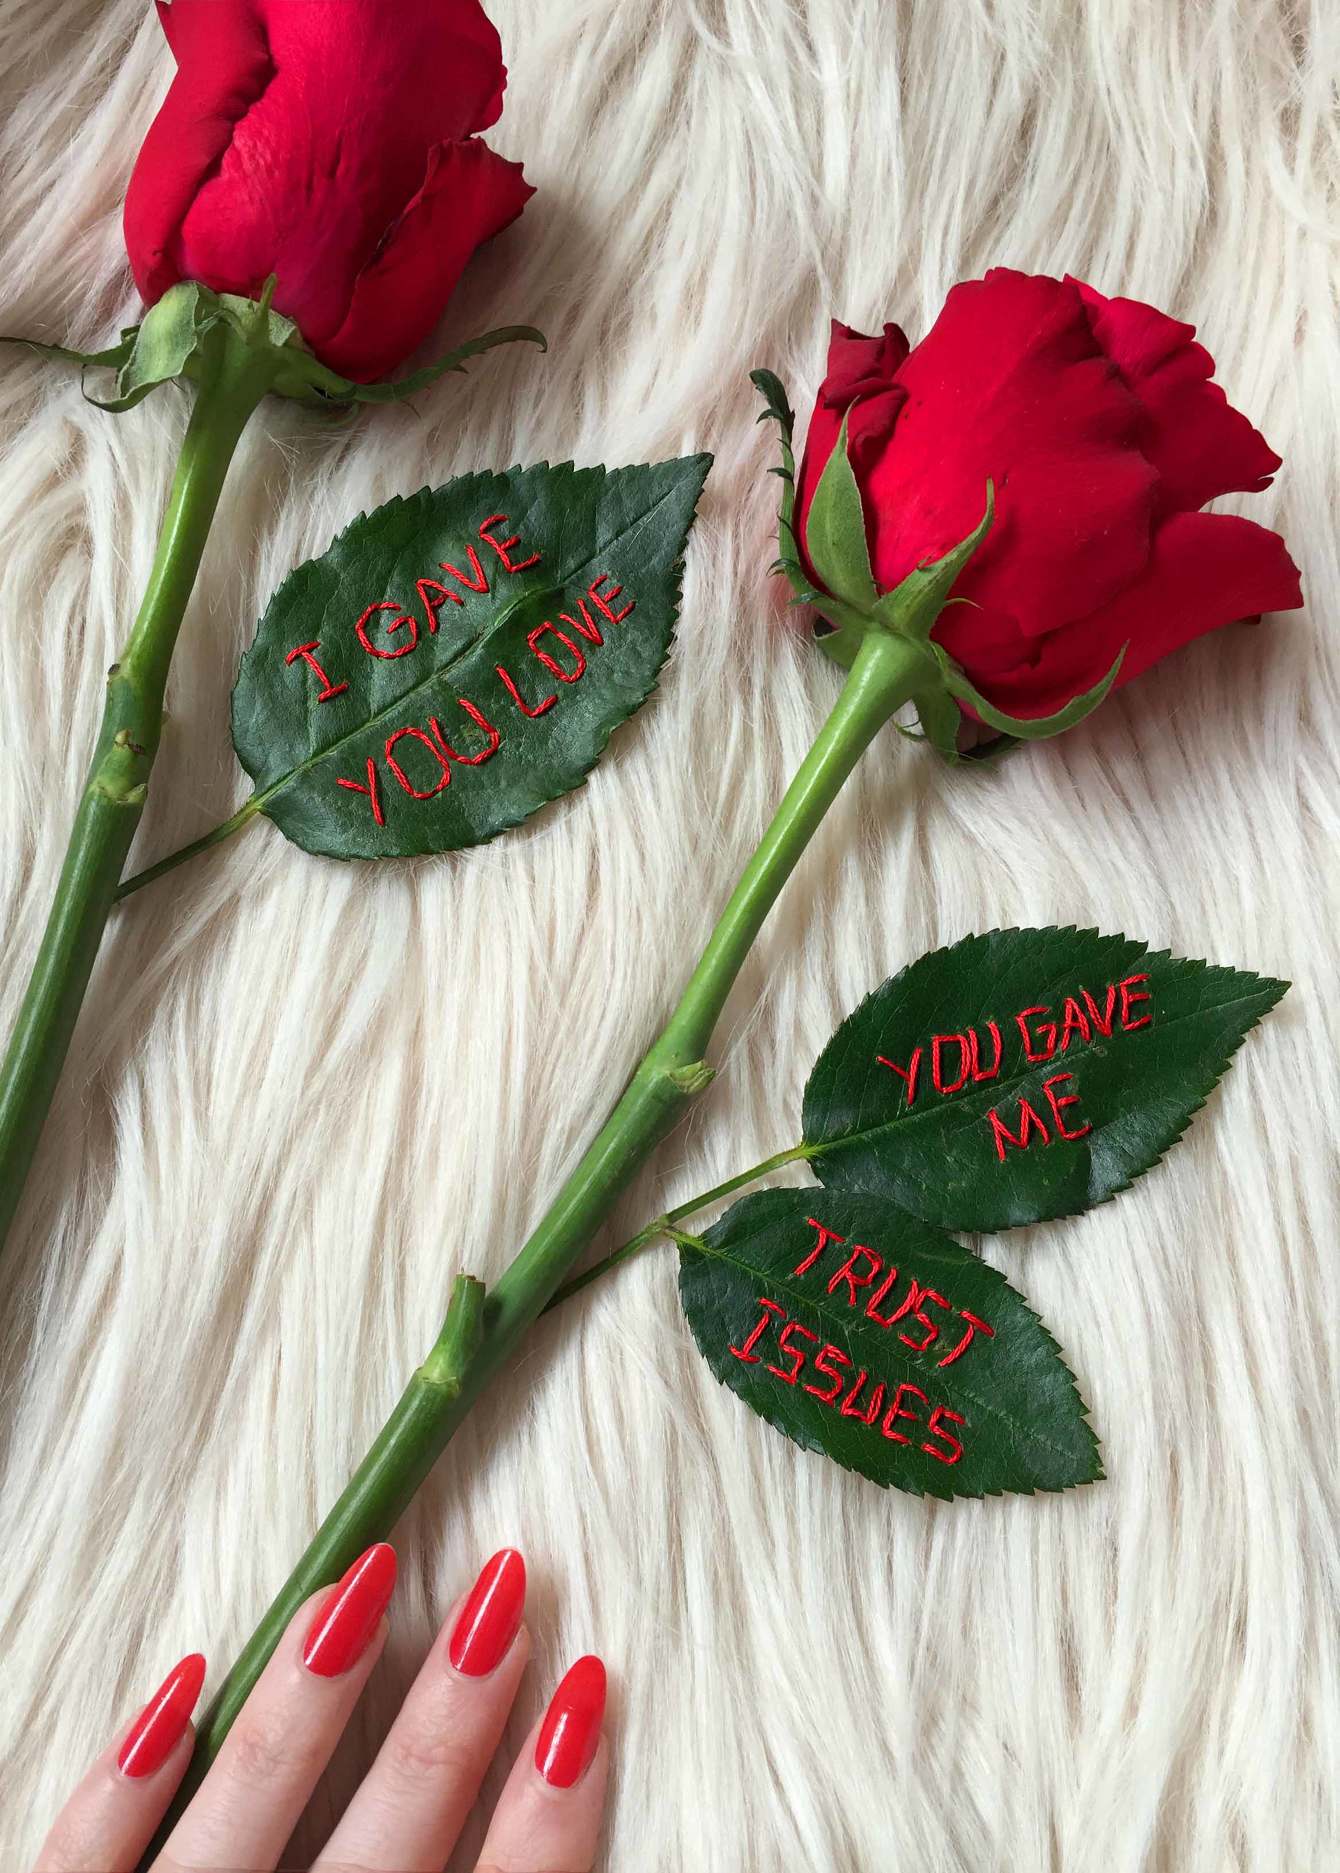 embroidered "I gave you love, you gave me trust issues" real rose, 2017, Sophie King